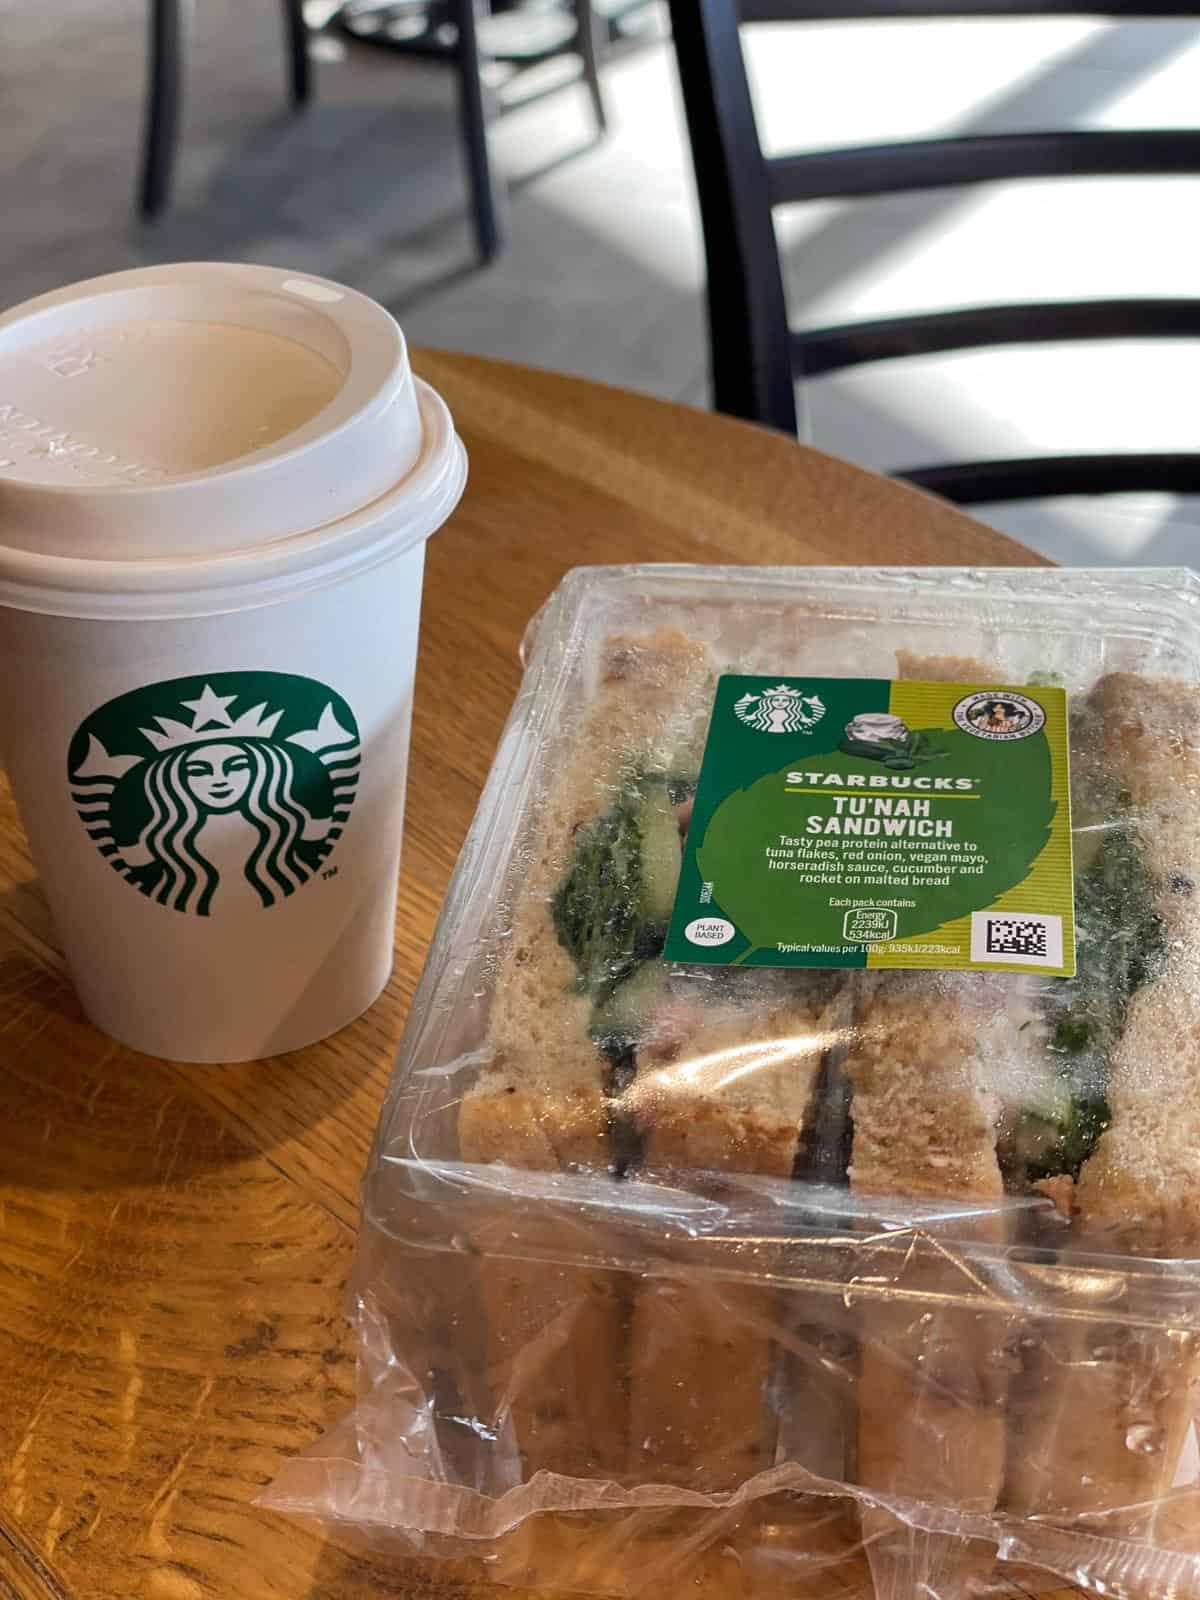 A cup of starbucks of coffee and a sandwich